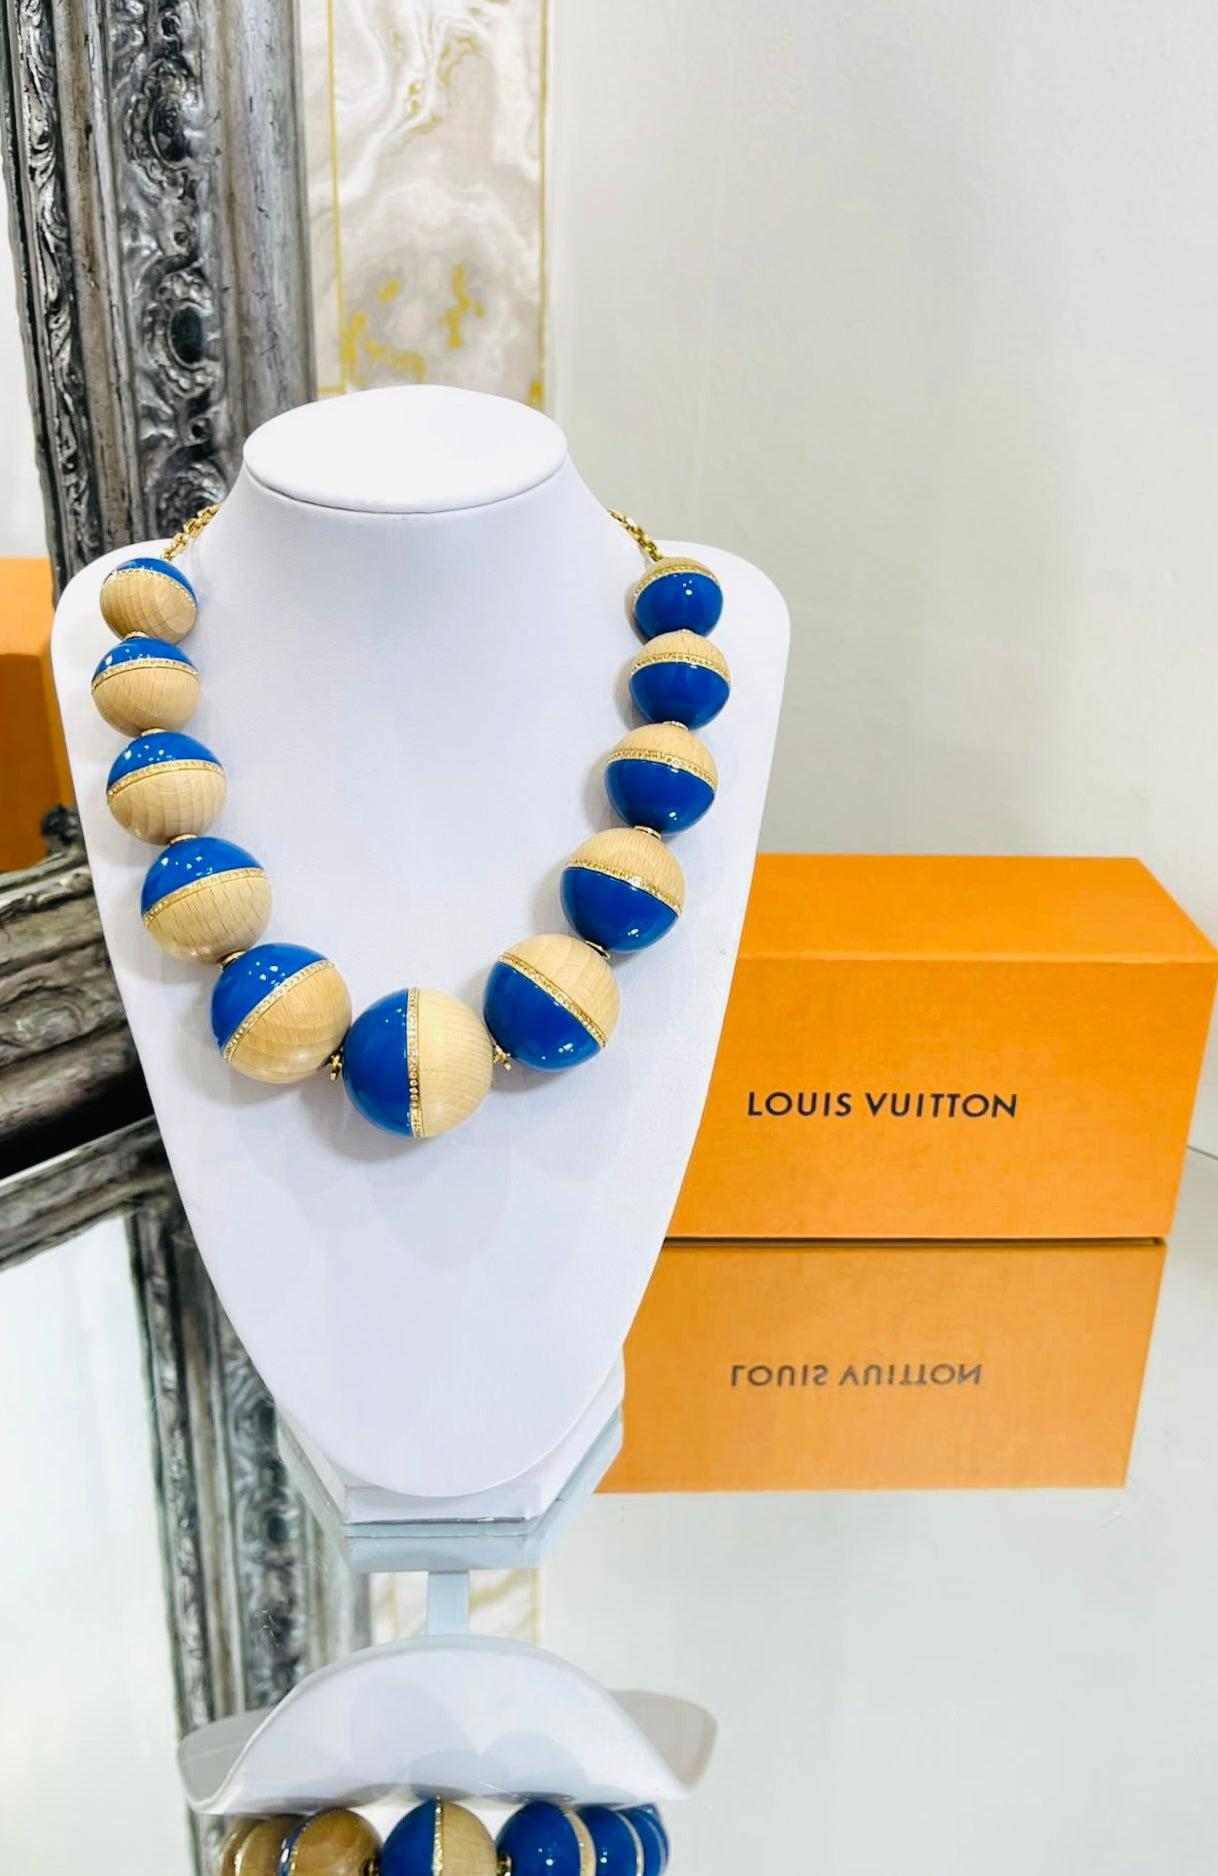 LOUIS VUITTON Necklace Pendant AUTH Kim Collier Blooming Strass LV